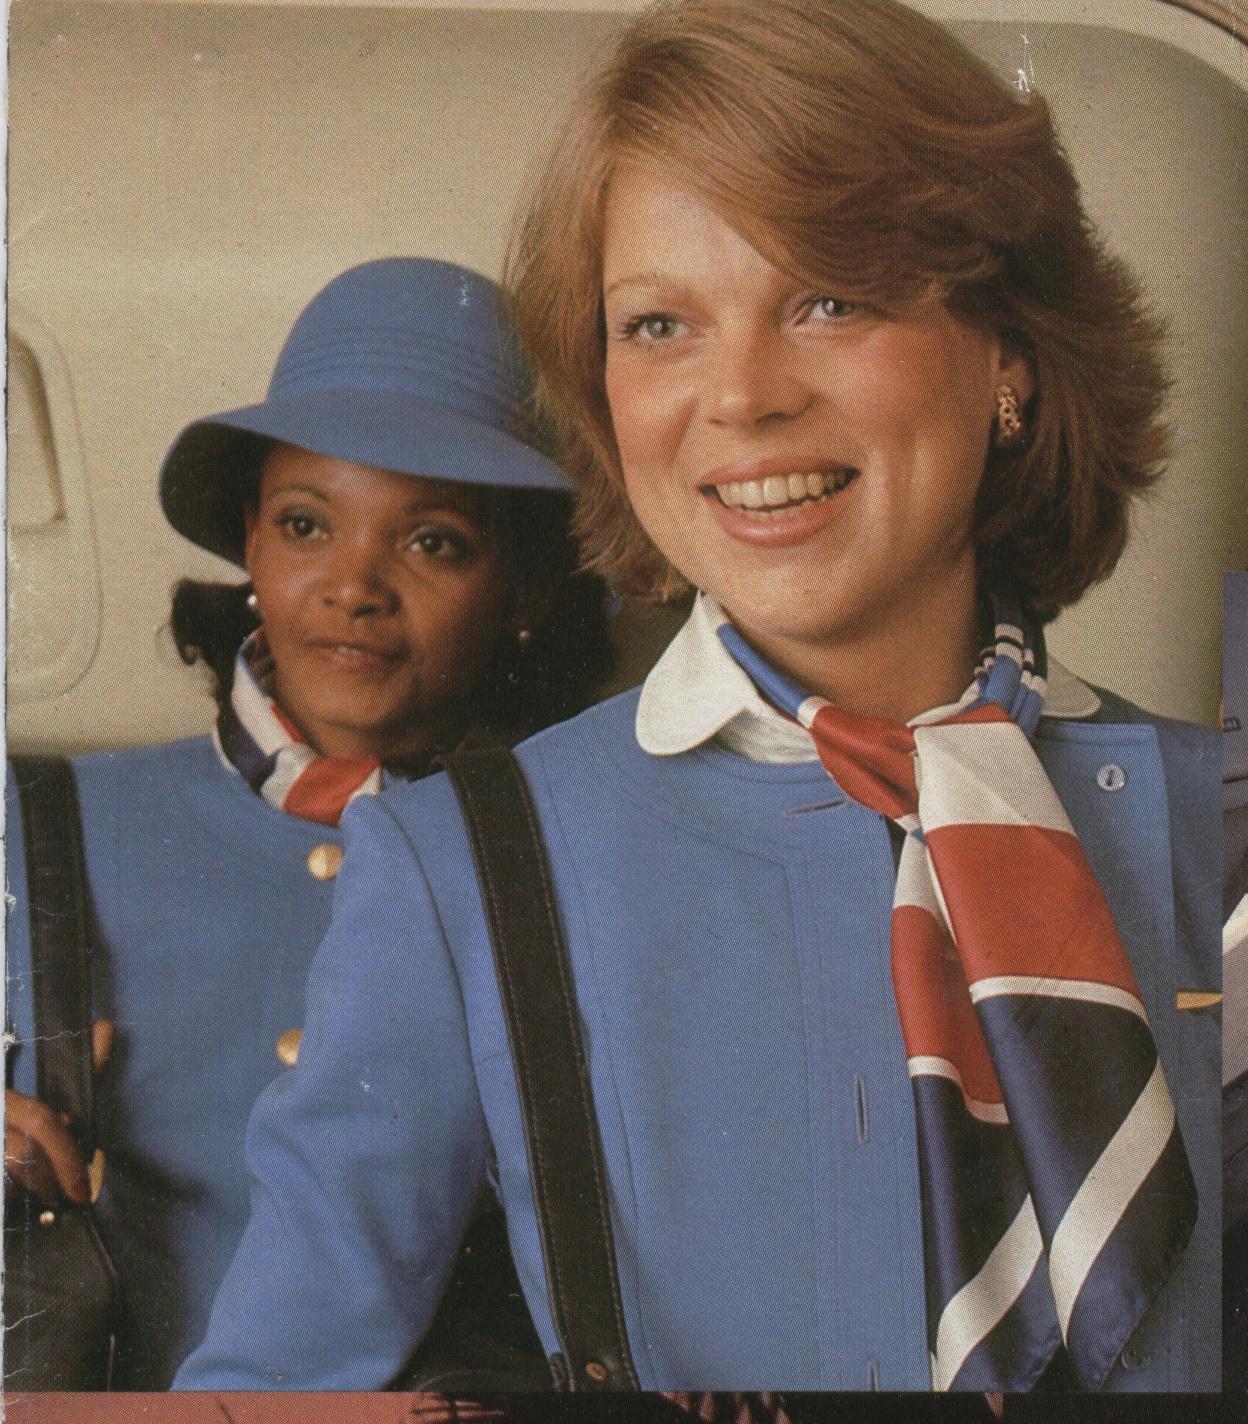 1977 Pan Am flight attendant Jennifer Andrews (left) and colleague pose in the doorway of a 747.  Their uniform was designed by Hollywood costume designer, Edith Head and introduced in 1975. 